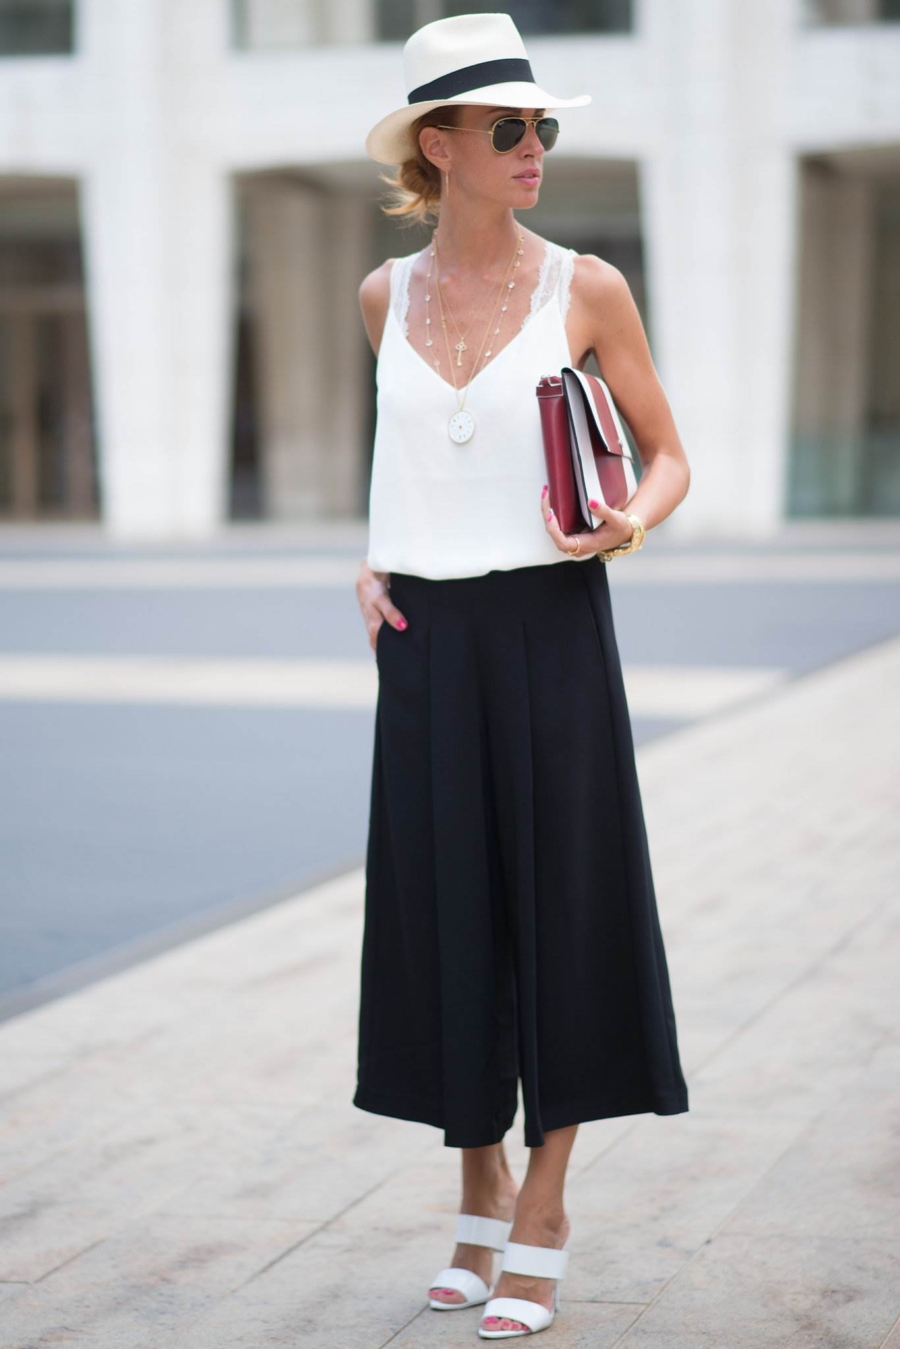 Black Culottes - 5 Styles of Culottes That Proves They’re For Everyone // NotJessFashion.com